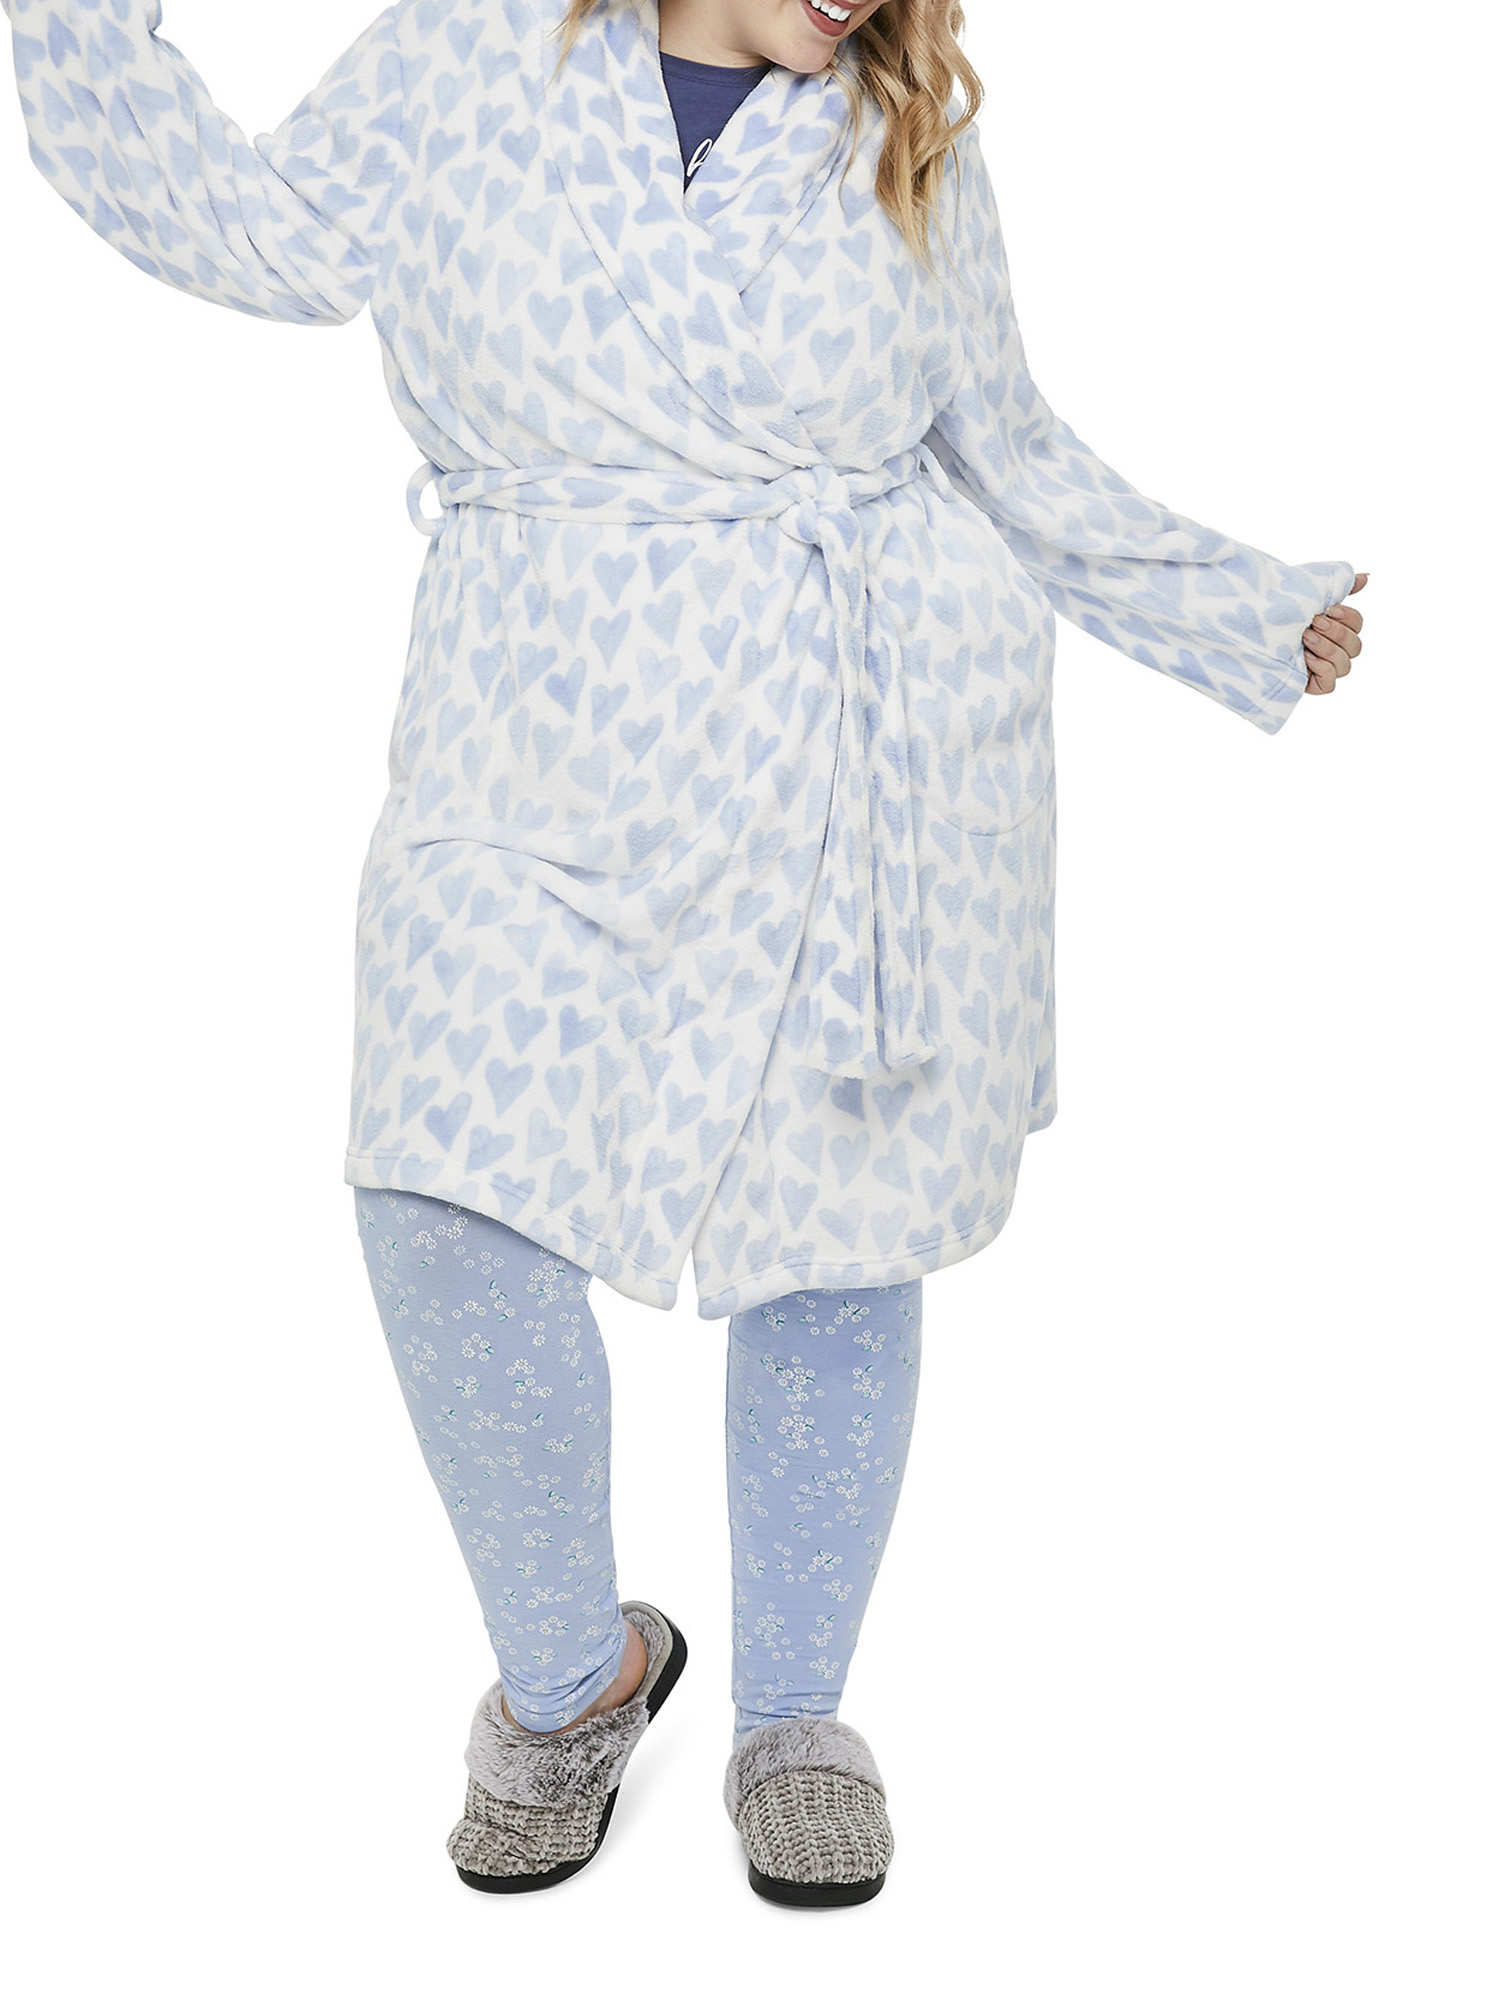 GEORGE Hearts Afternoon Polyester Robe (Women's or Women's Plus) 1 Pack - image 1 of 7